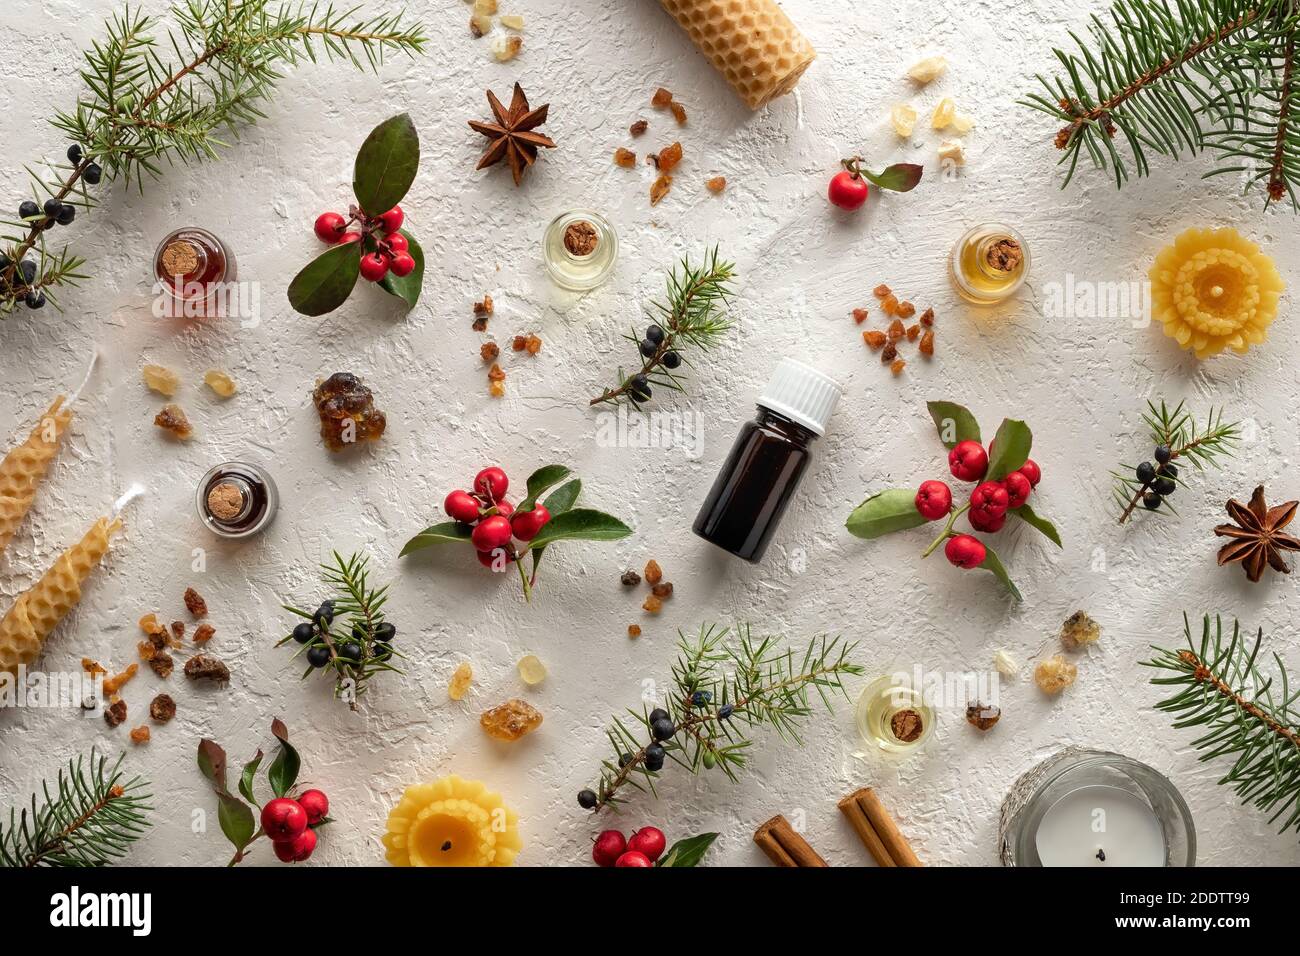 Christmas selection of essential oils with frankincense, myrrh, wintergreen, juniper and other herbs Stock Photo